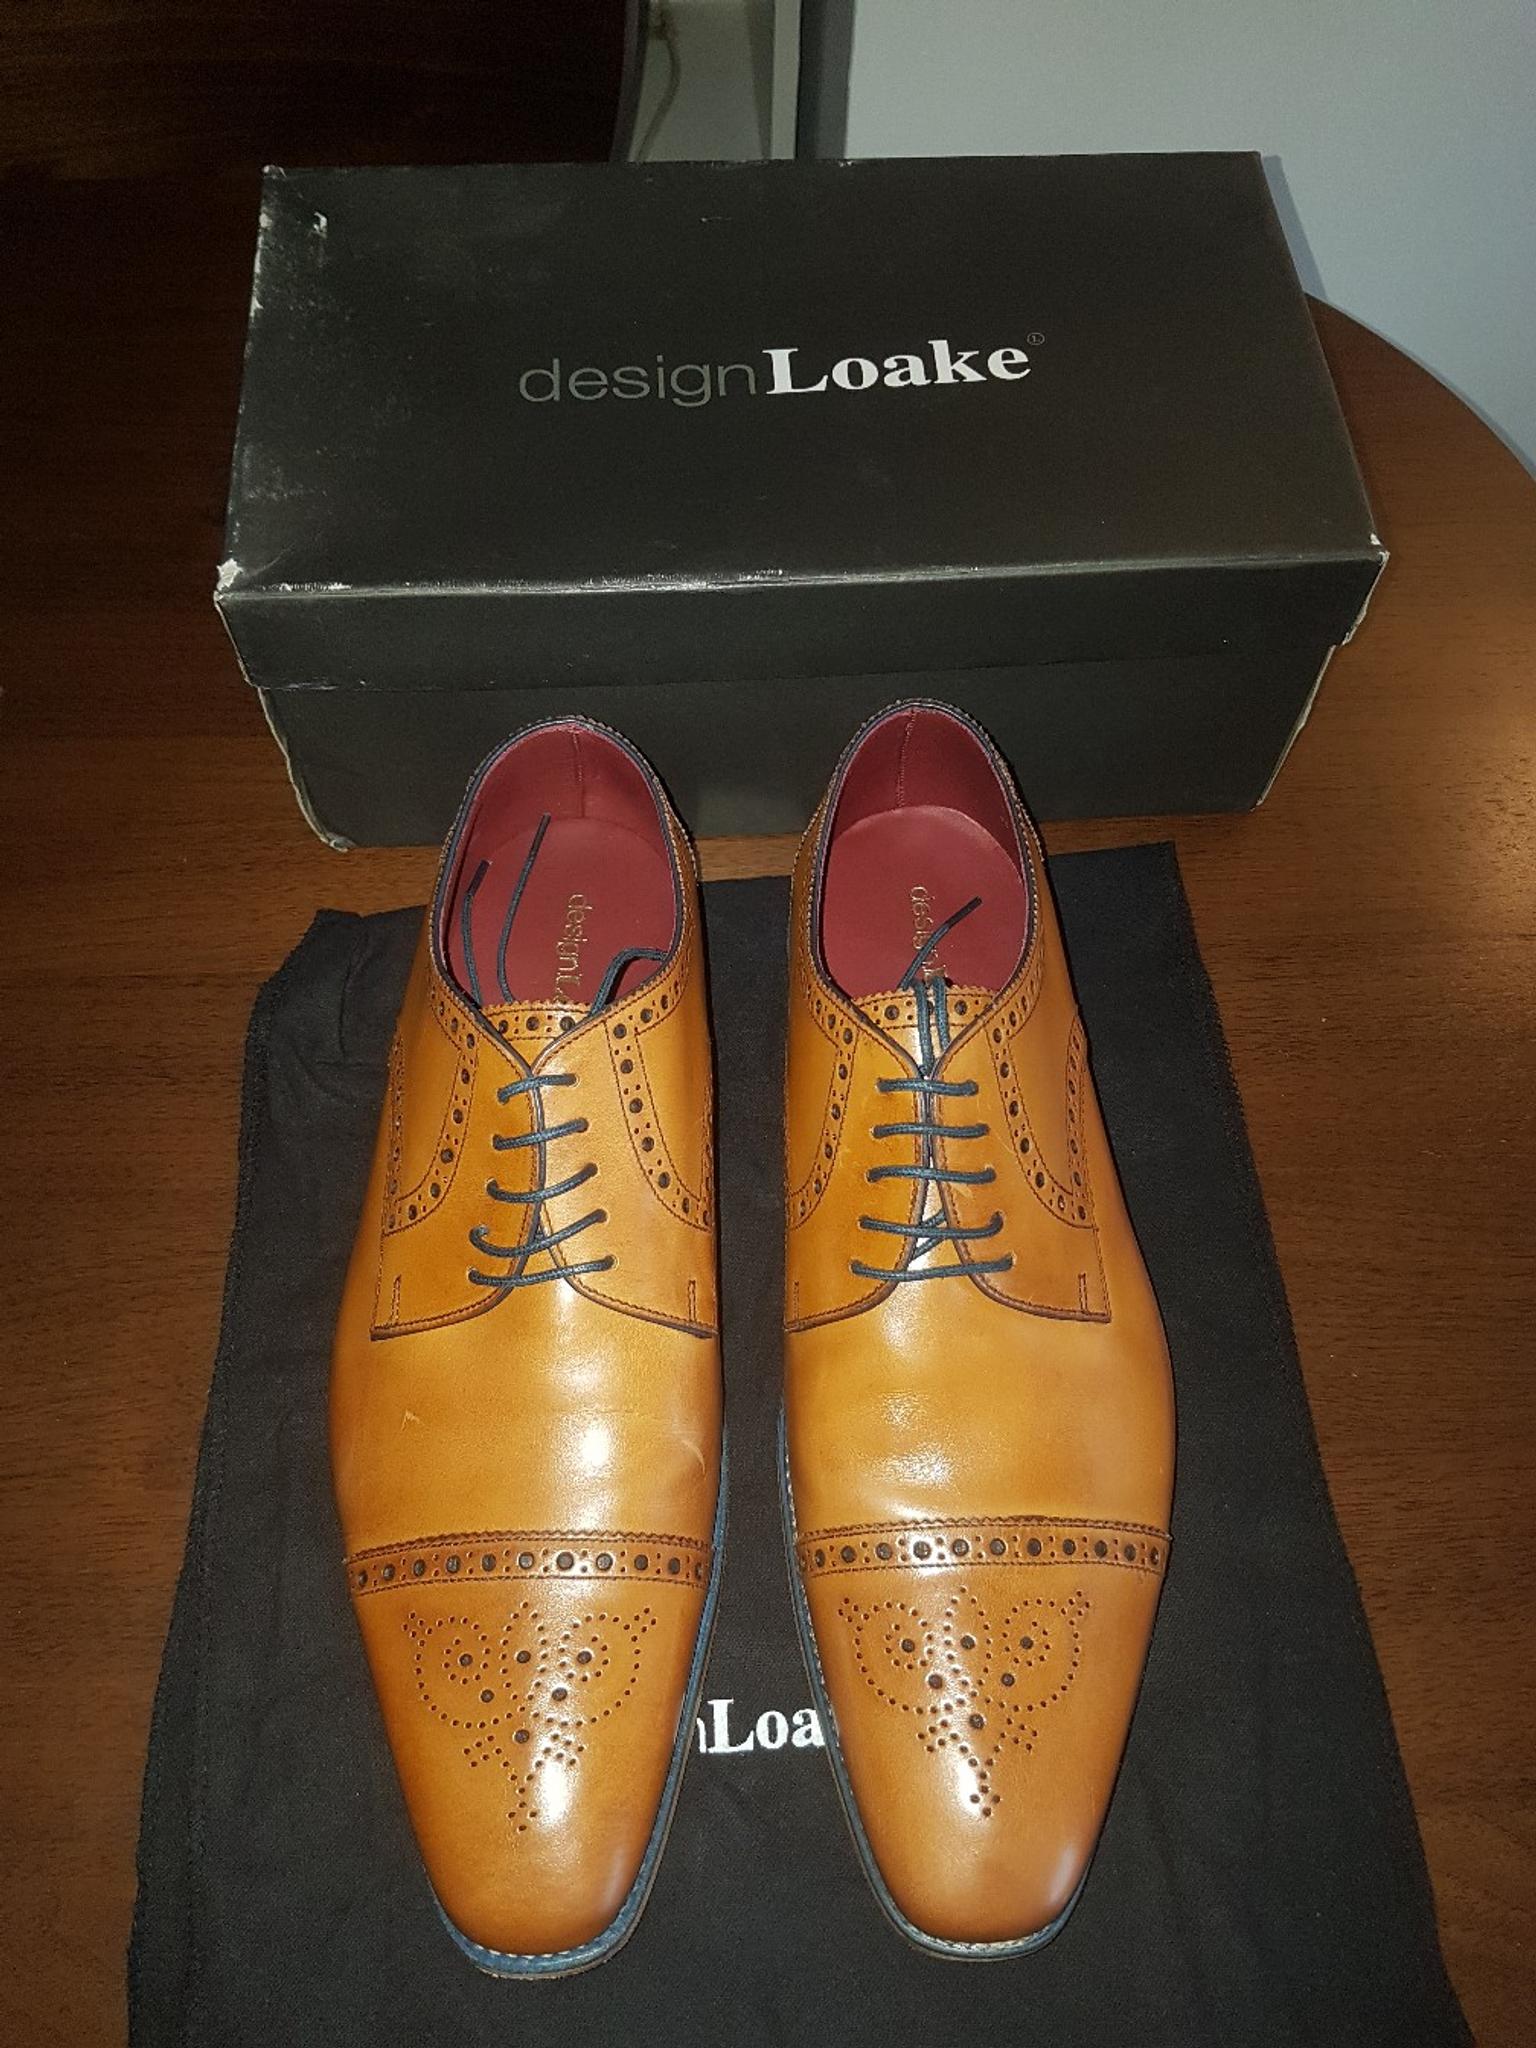 design loake off 60% - rhsolutions.in